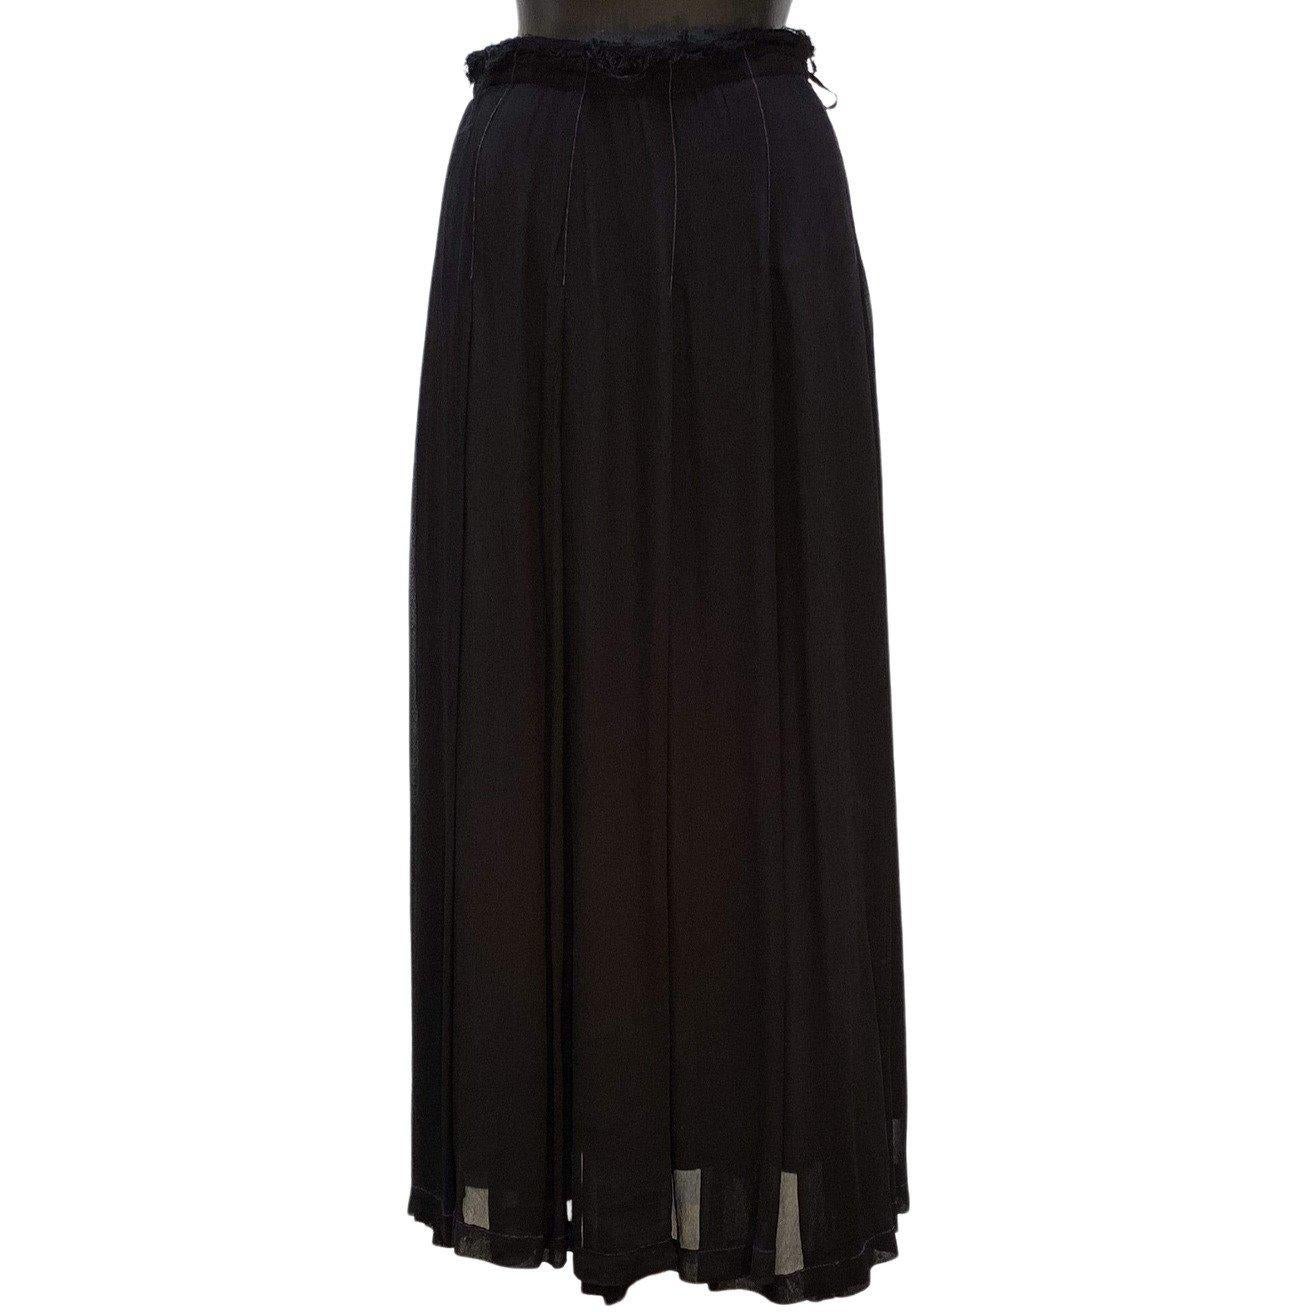 This full, weighty black skirt boasts multiple layers of rayon and cotton joined at the elasticized waist with a side zipper closure. Contrasting purple stitching and intentional fraying at the waist make this vintage skirt a standout. 